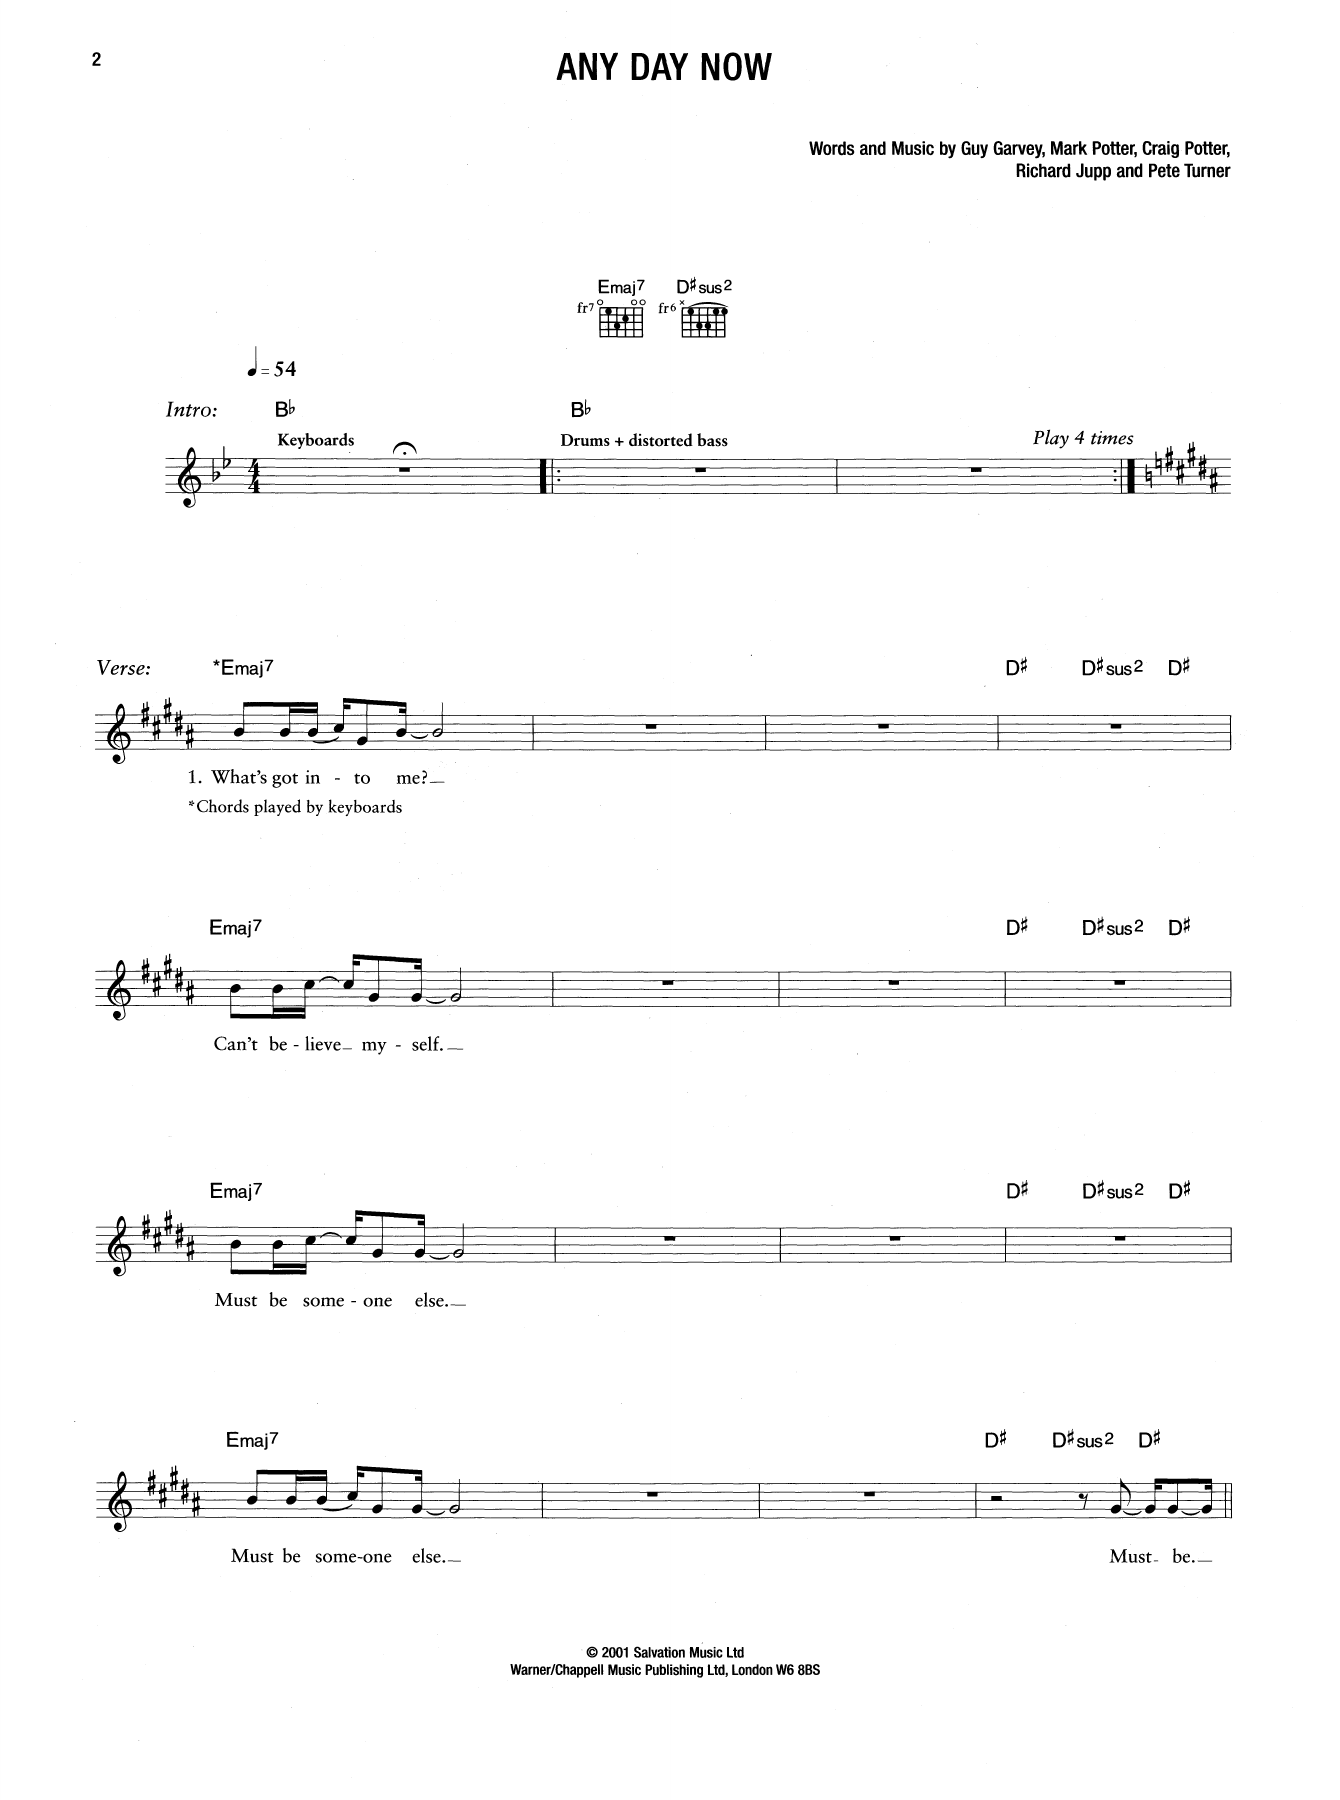 Download Elbow Any Day Now Sheet Music